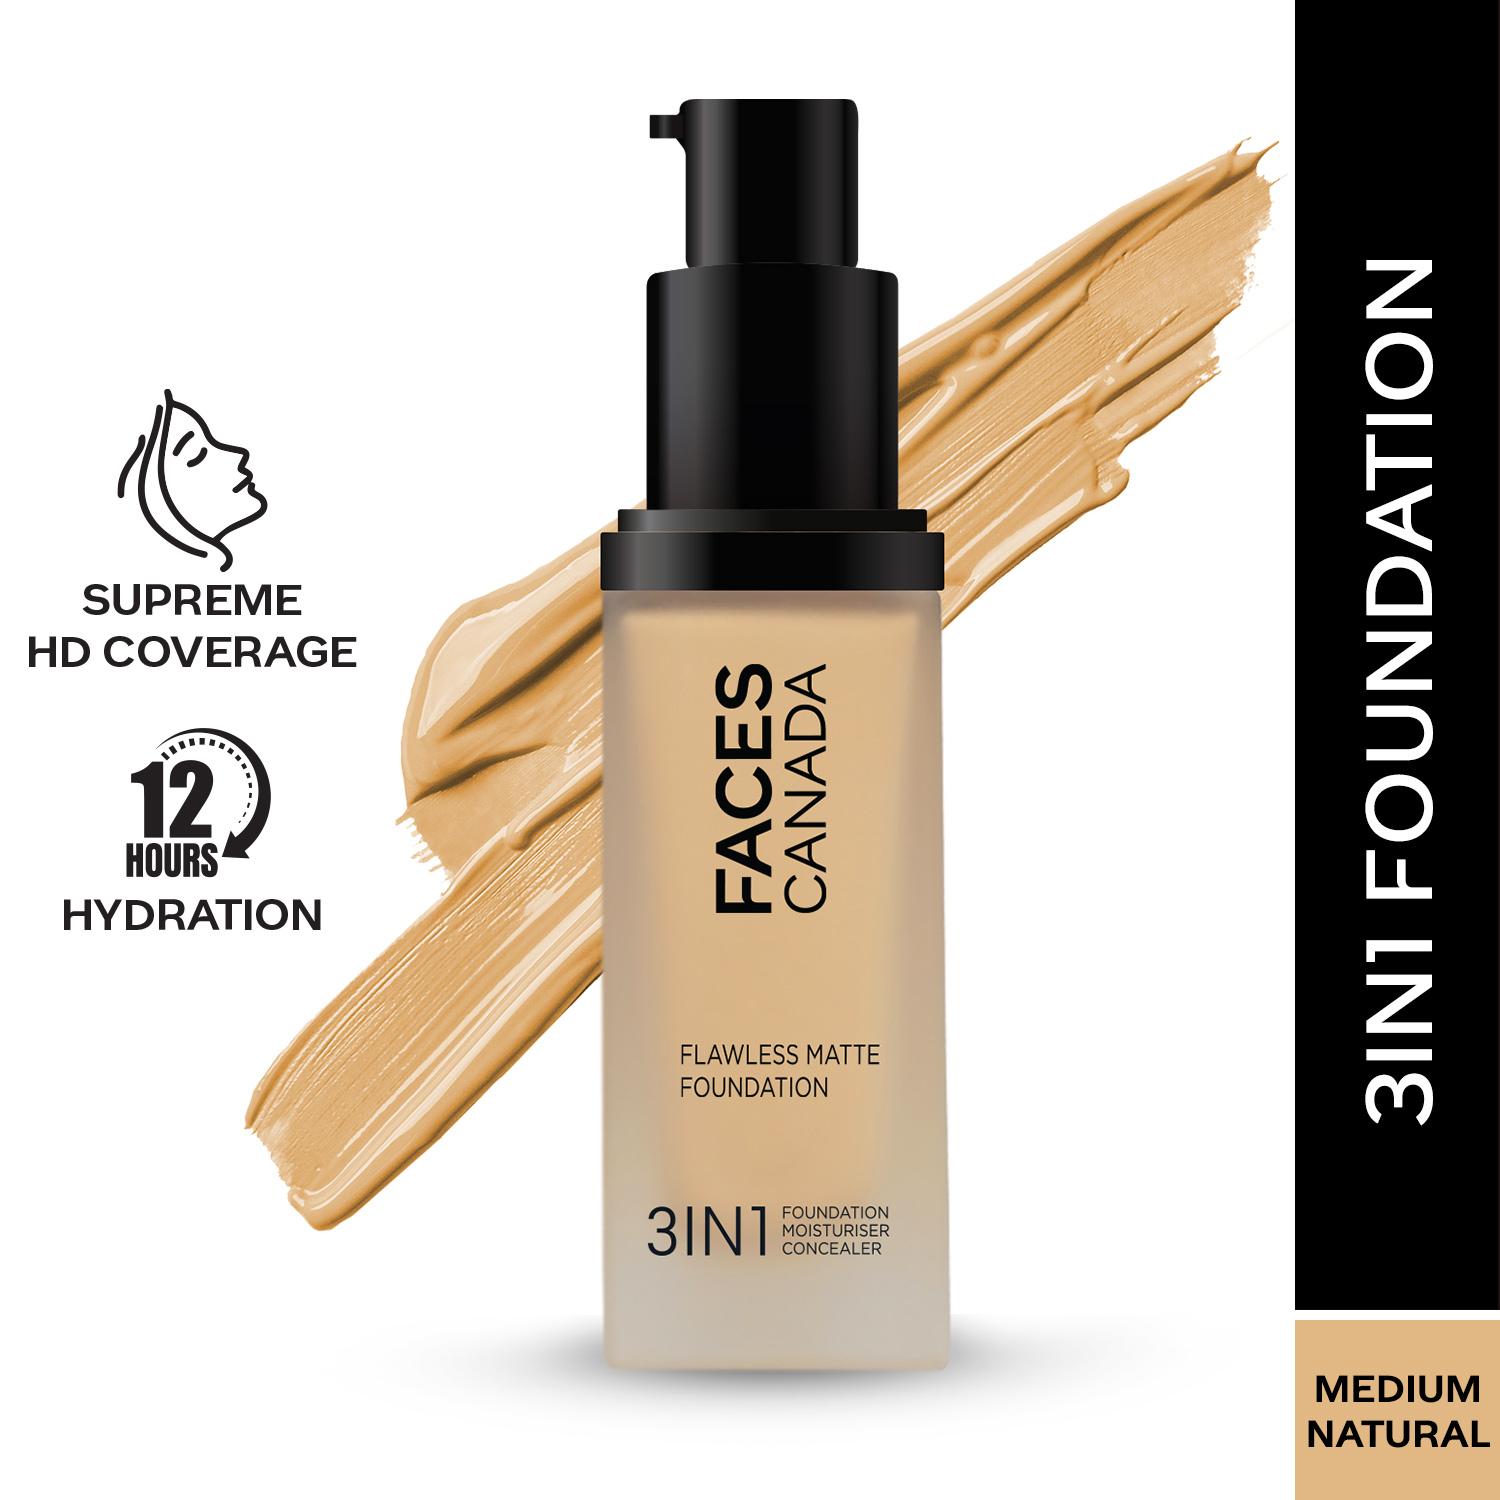 Faces Canada | Faces Canada Flawless Matte Foundation - Medium Natural 022, 12 HR Hydration + SPF 18 (30 ml)